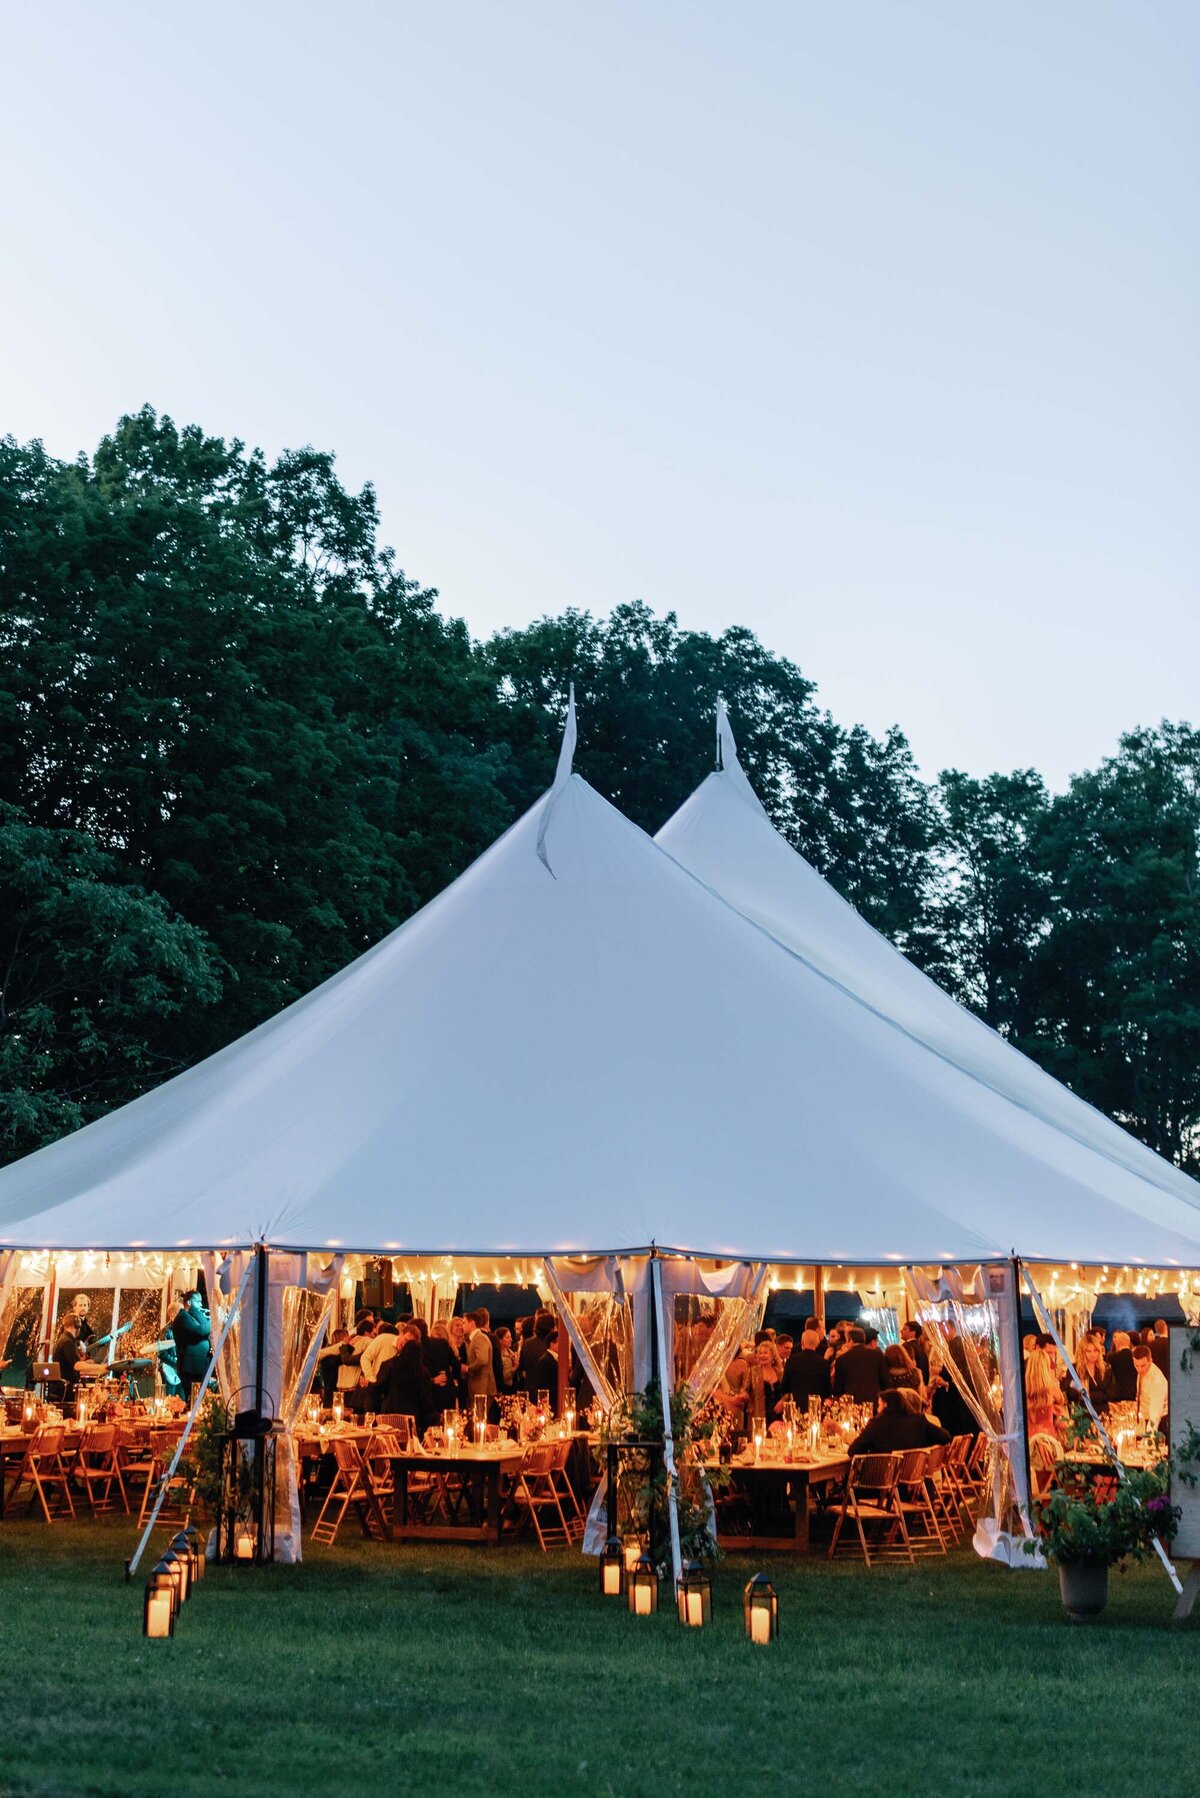 wedding tent illuminated in evening light with candles